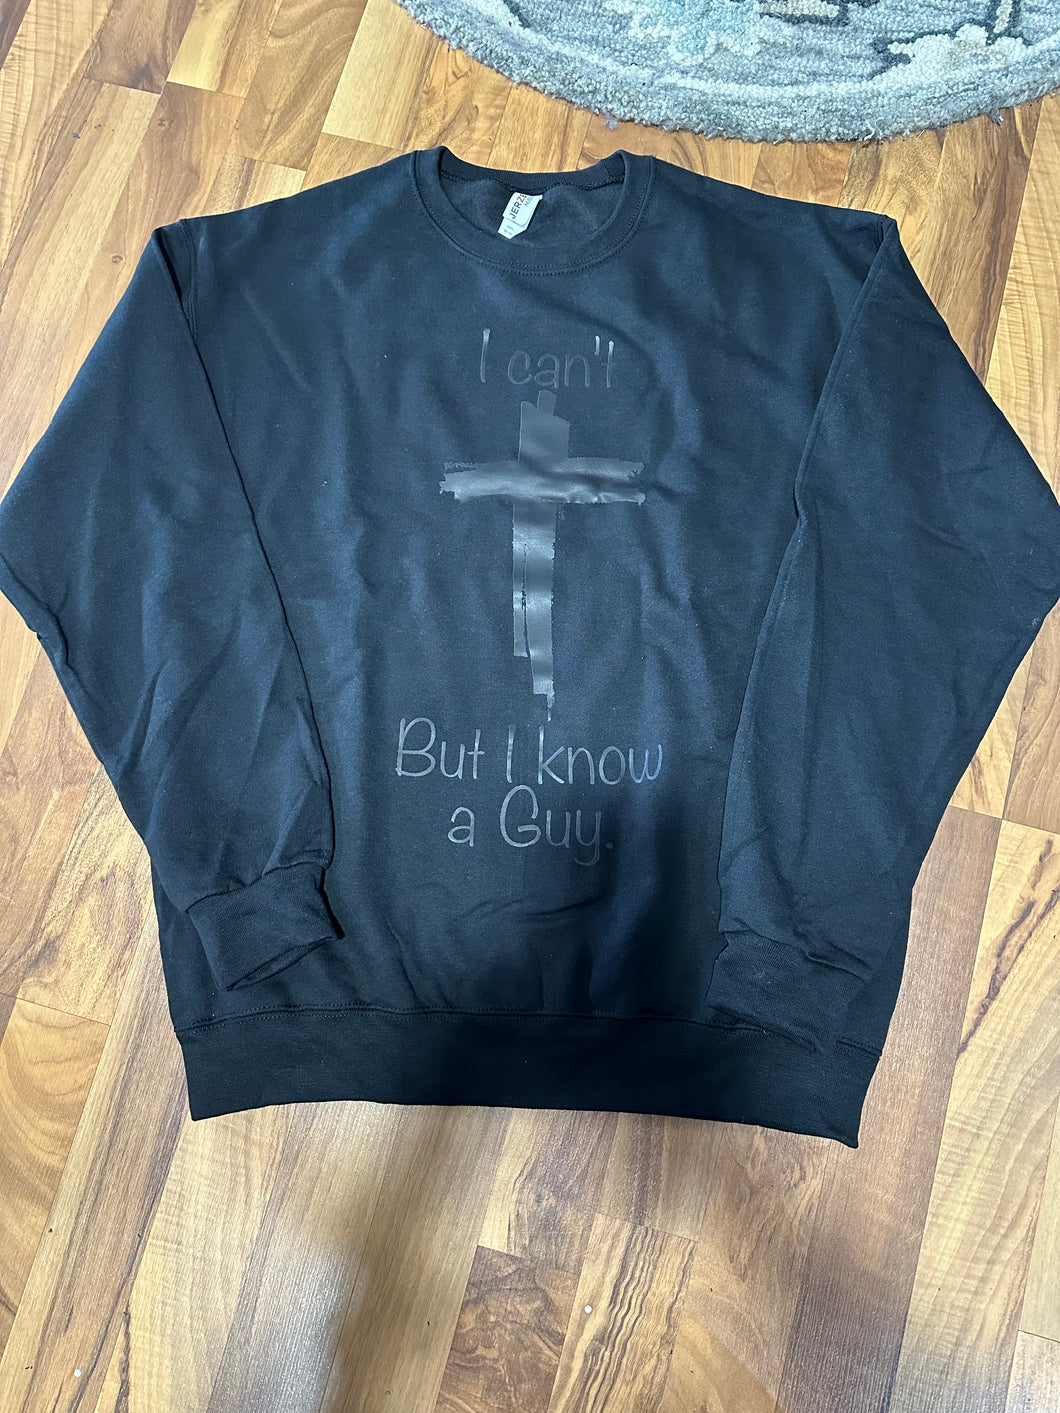 Black I Can't But I know a Guy, Christian Sweatshirt